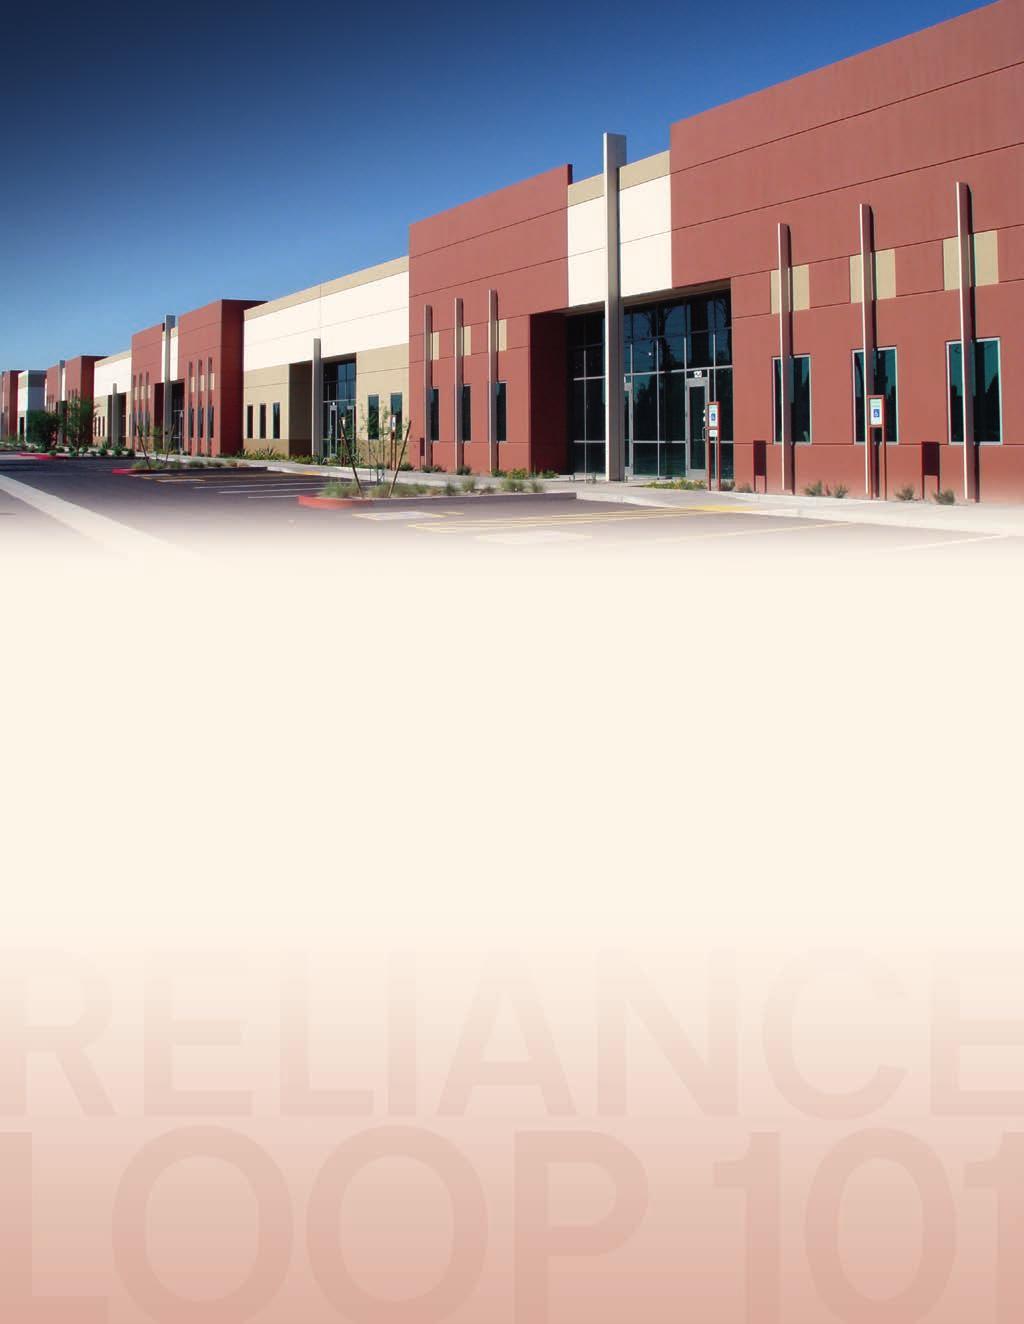 S IMMEDIATELY AVAILABLE RELIANCE LOOP 101 COMMERCE CENTER LOCATED NORTH OF THE NEC OF LOOP 101 AND OLIVE AVENUE, PEORIA, AZ SPEC S IMMEDIATELY AVAILABLE PROPERTY HIGHLIGHTS:» Award Winning Property»